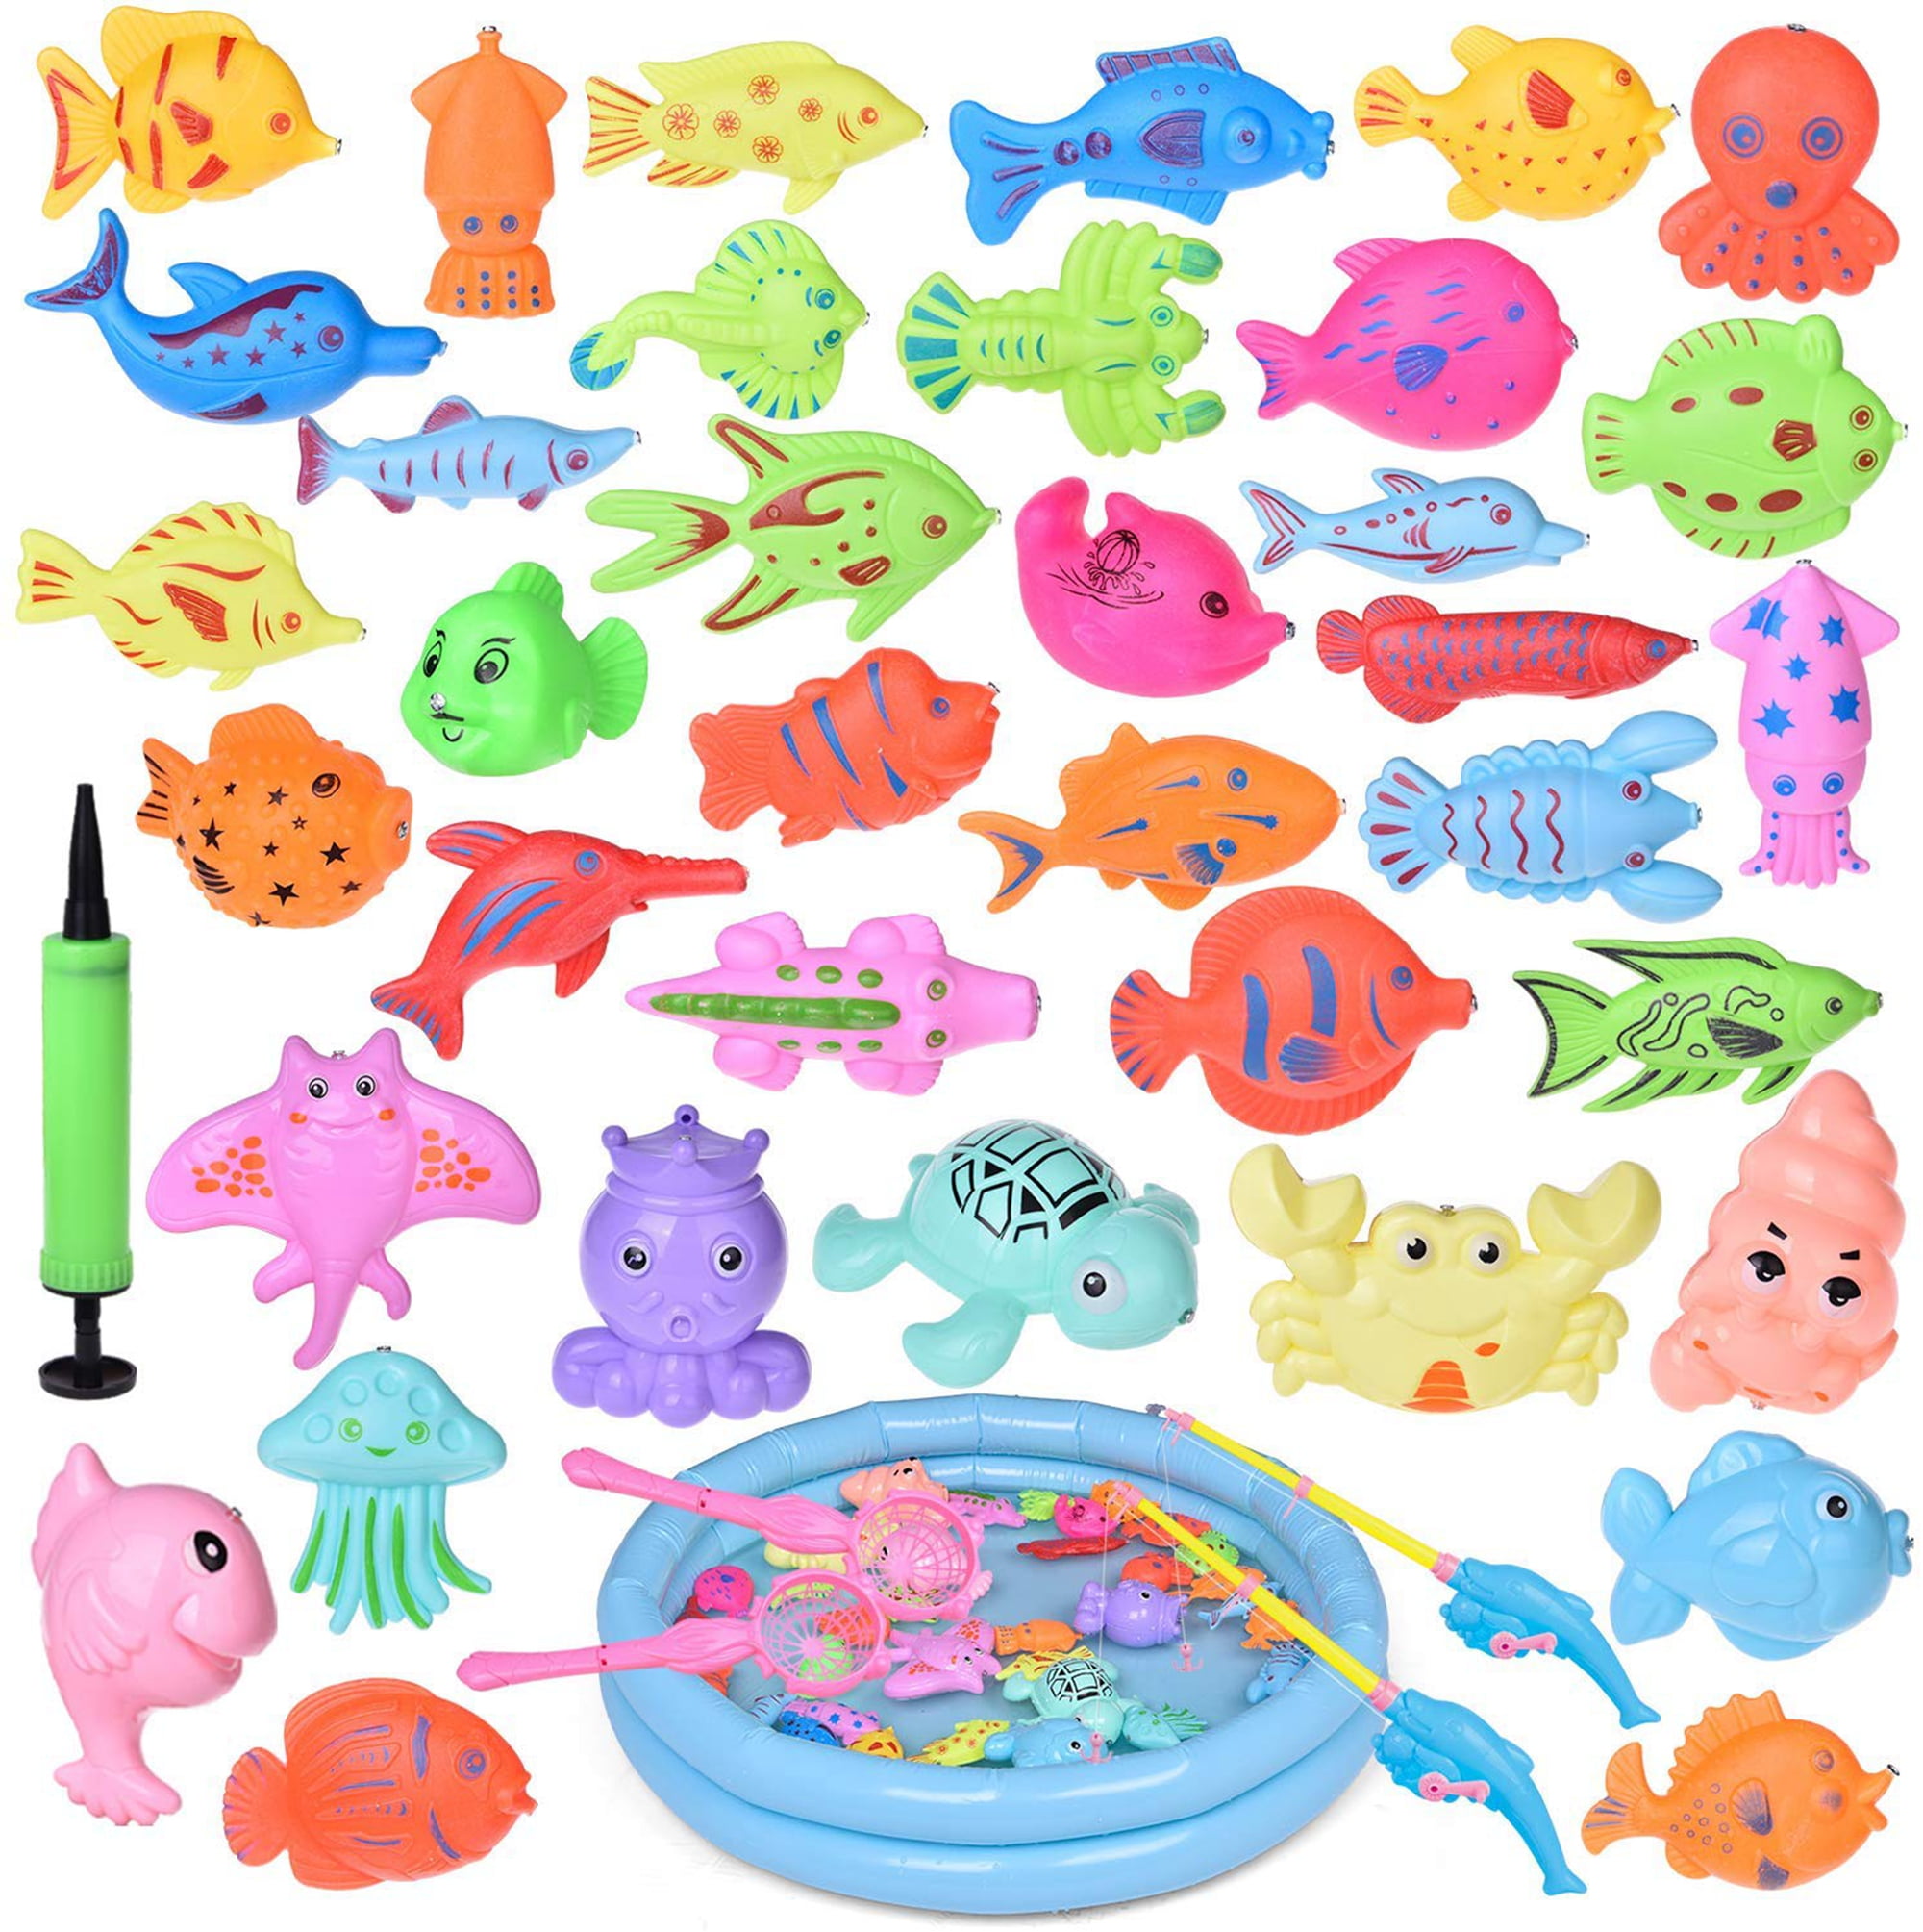 Magnetic Fishing Set for Kids Pretend Play 13pcs - 12 Fishes and 1 Pole 